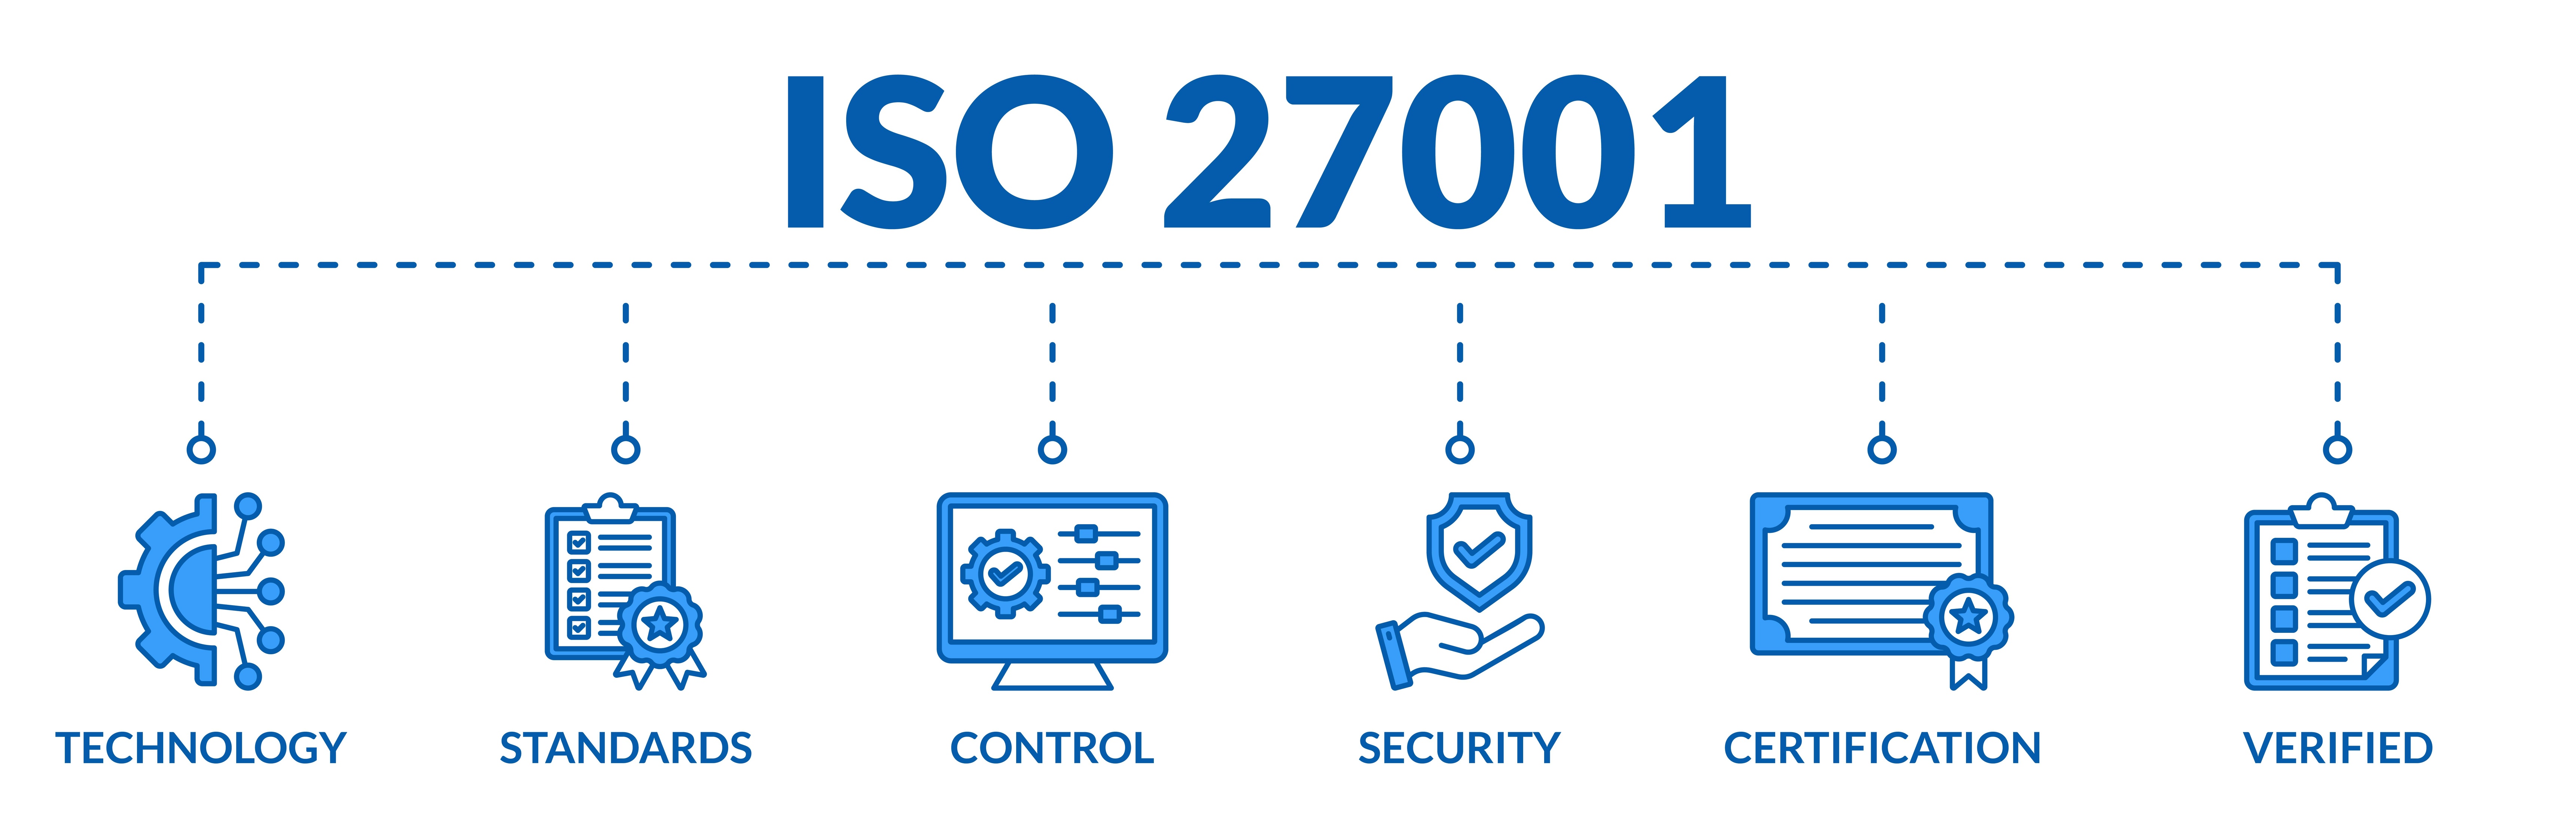 Banner of iso 27001 web vector illustration concept information security management system (ISMS) with icons of technology, standards, control, security, certification, verified